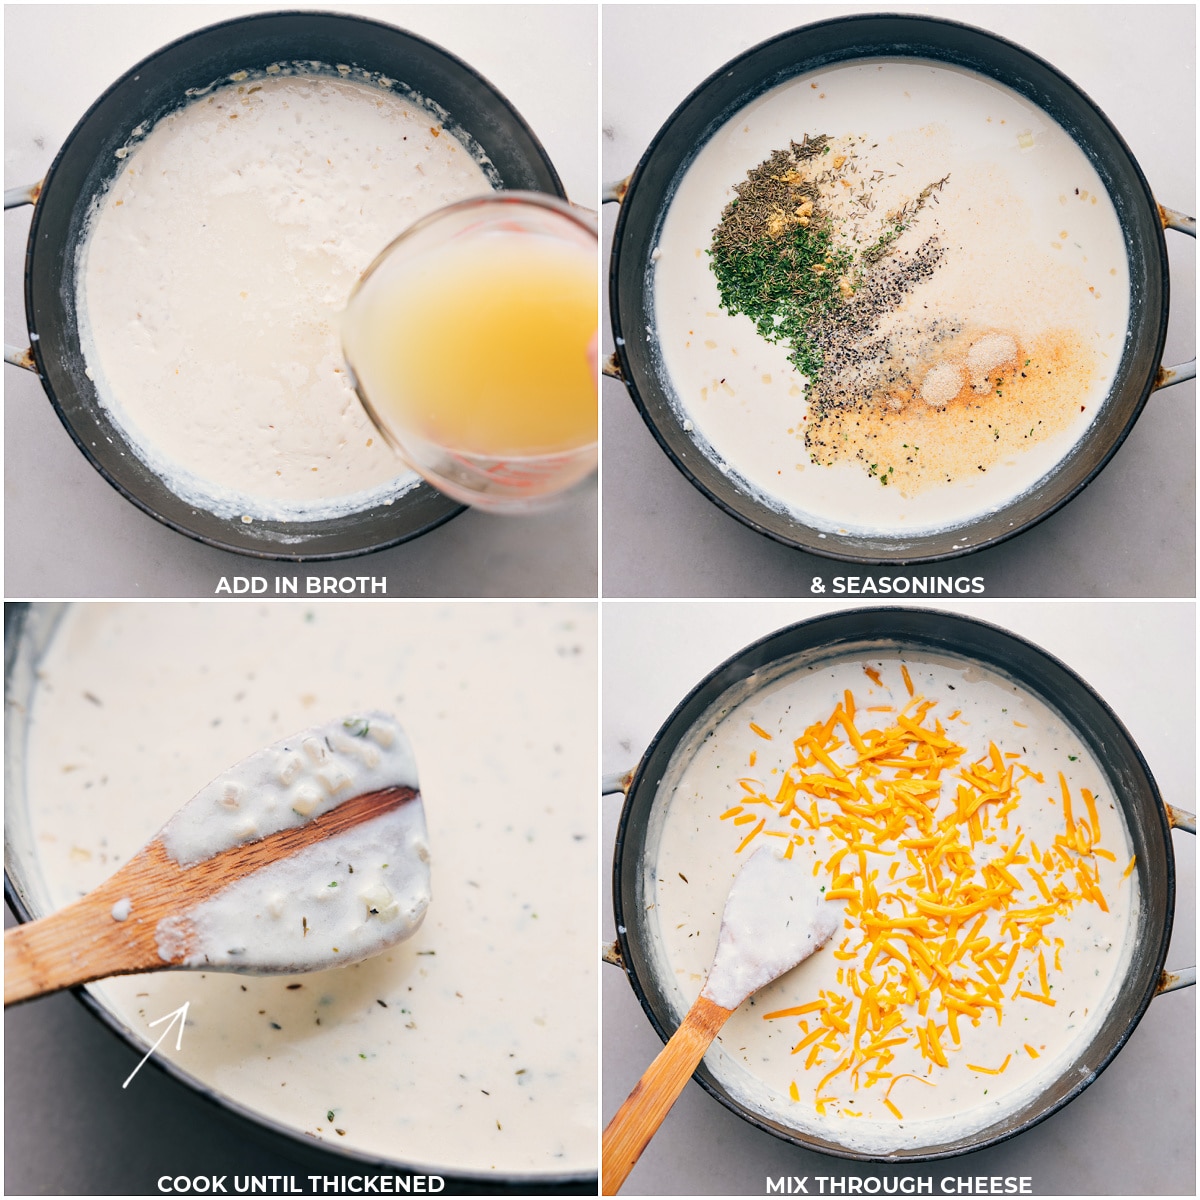 Adding broth and seasonings to a pot, cooking until thickened, and mixing in cheese to melt.